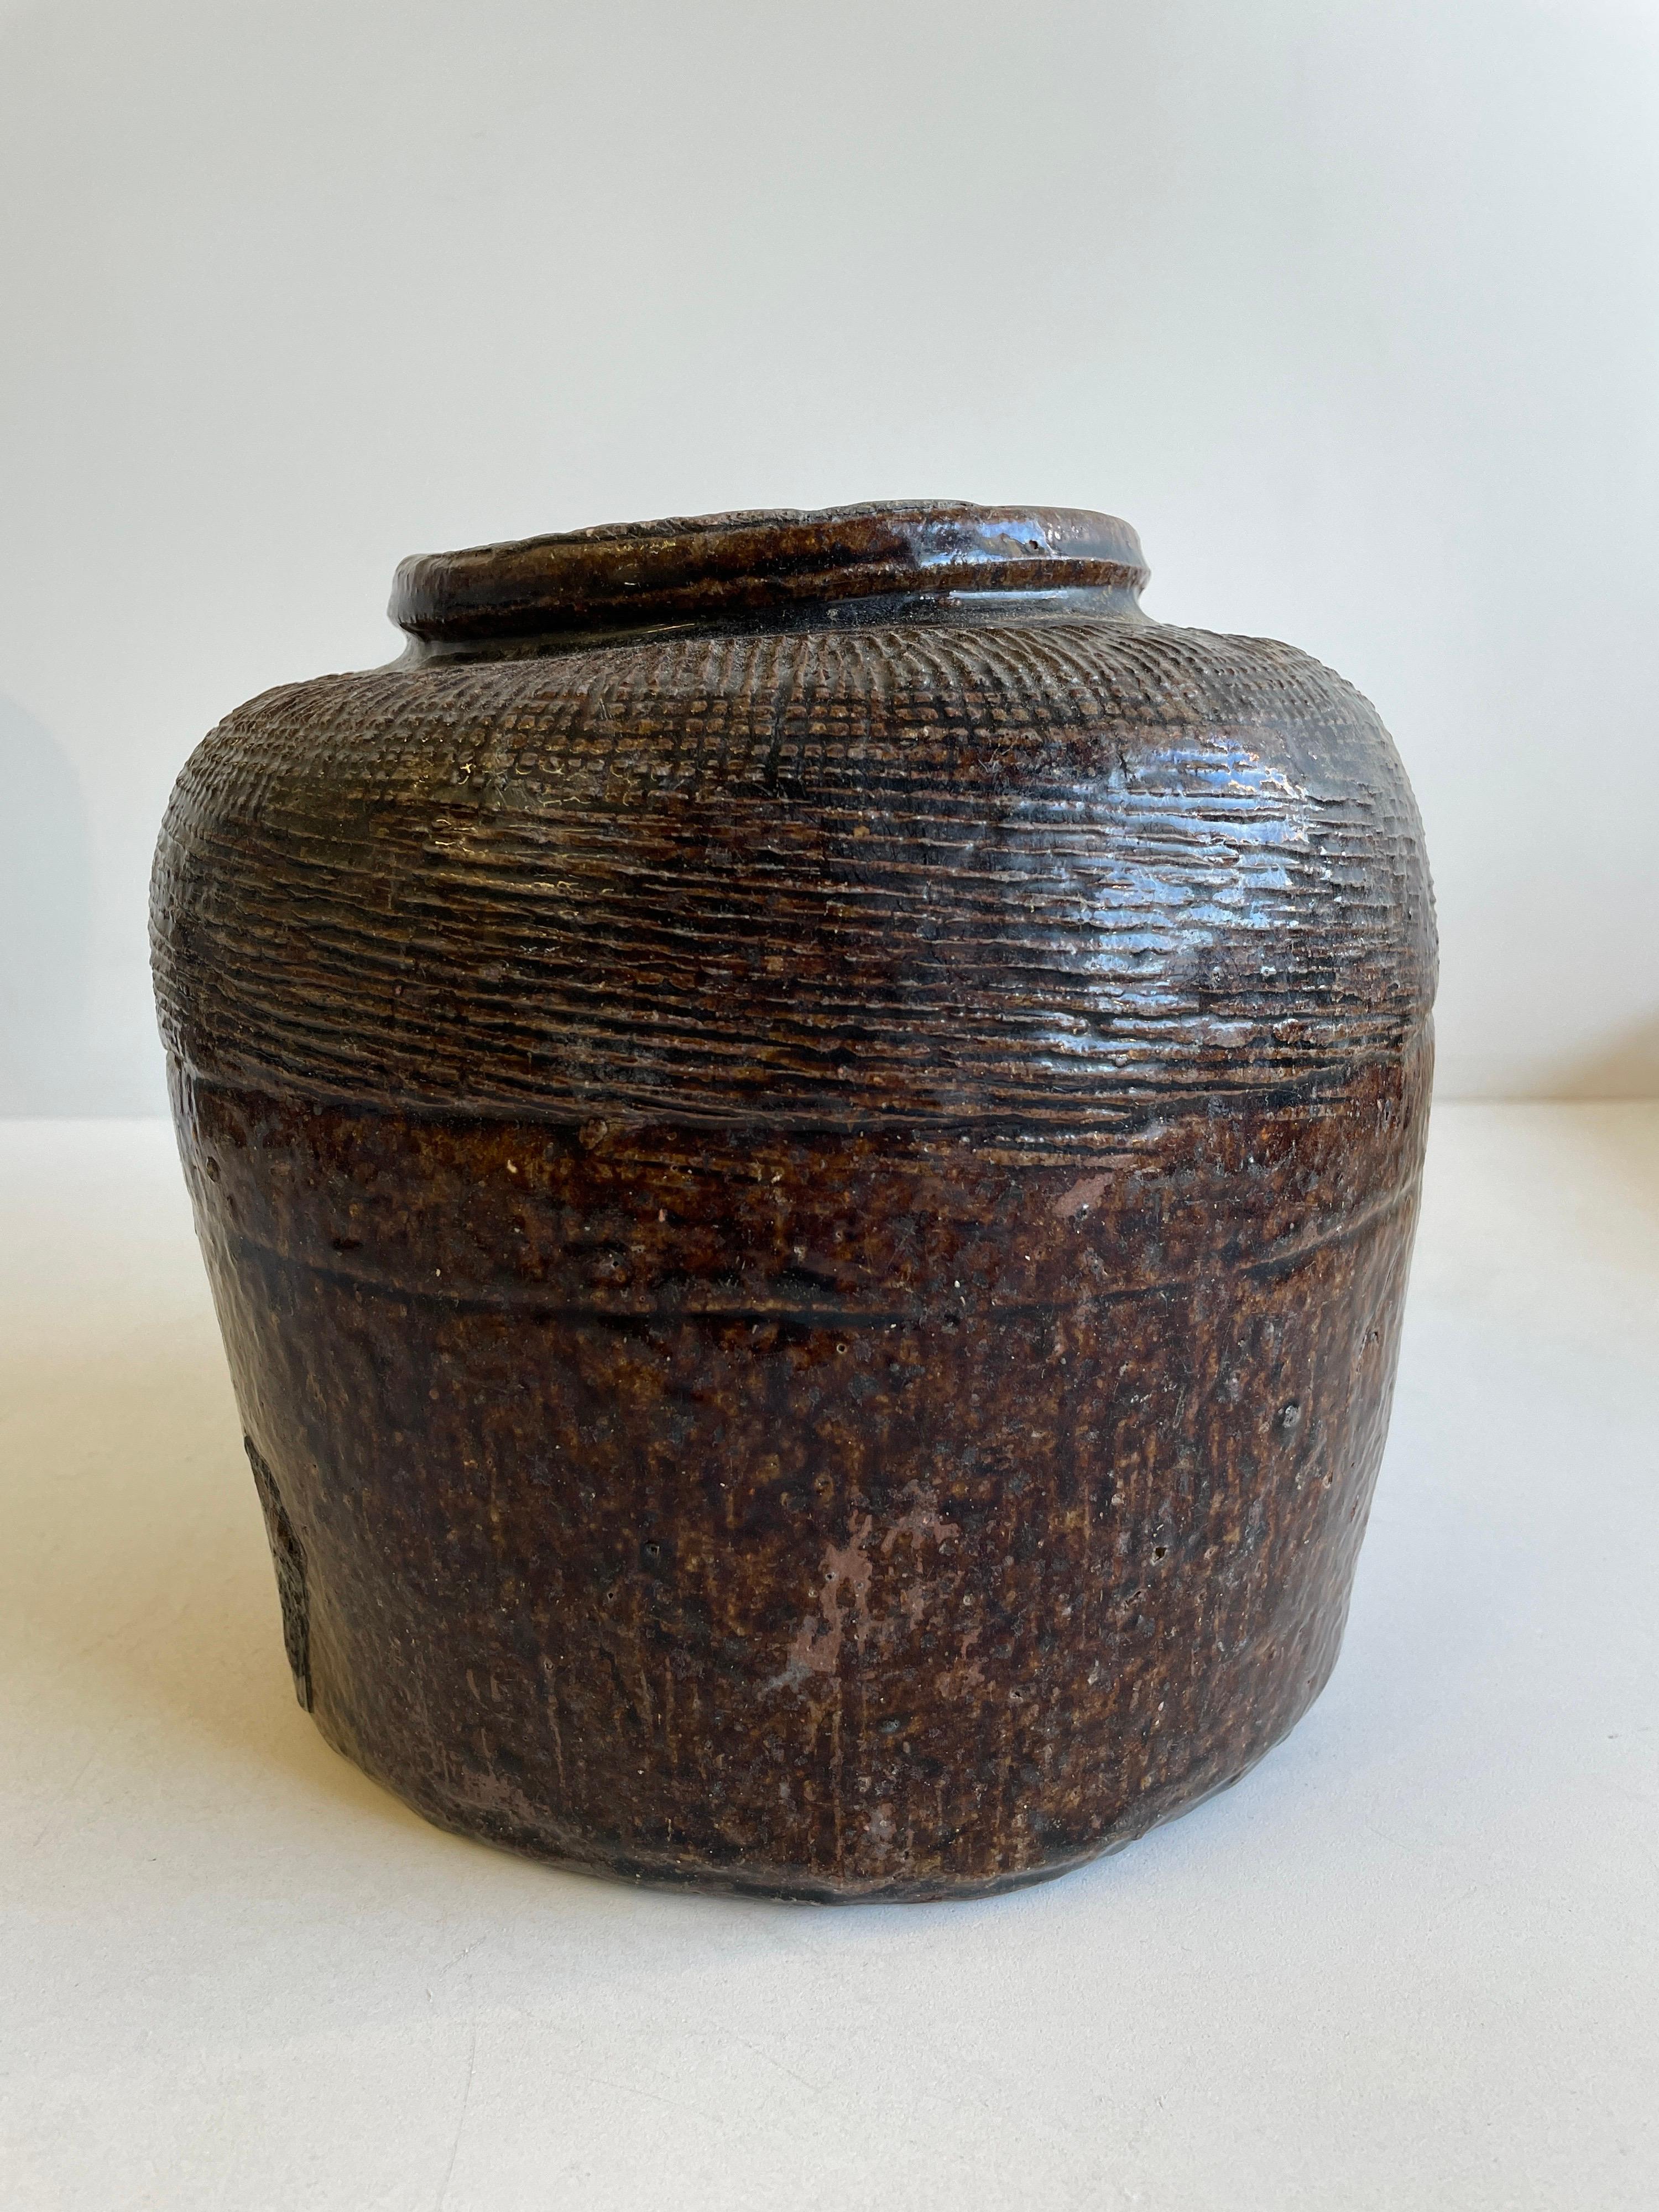 Beautifully glazed and rich in character, this vintage glazed oil pot adds just the right amount of texture + warmth where you need it. Stunning glazed finish with warm terra-cotta accents. Coloring is an olive green, dark brown tones. Each piece is